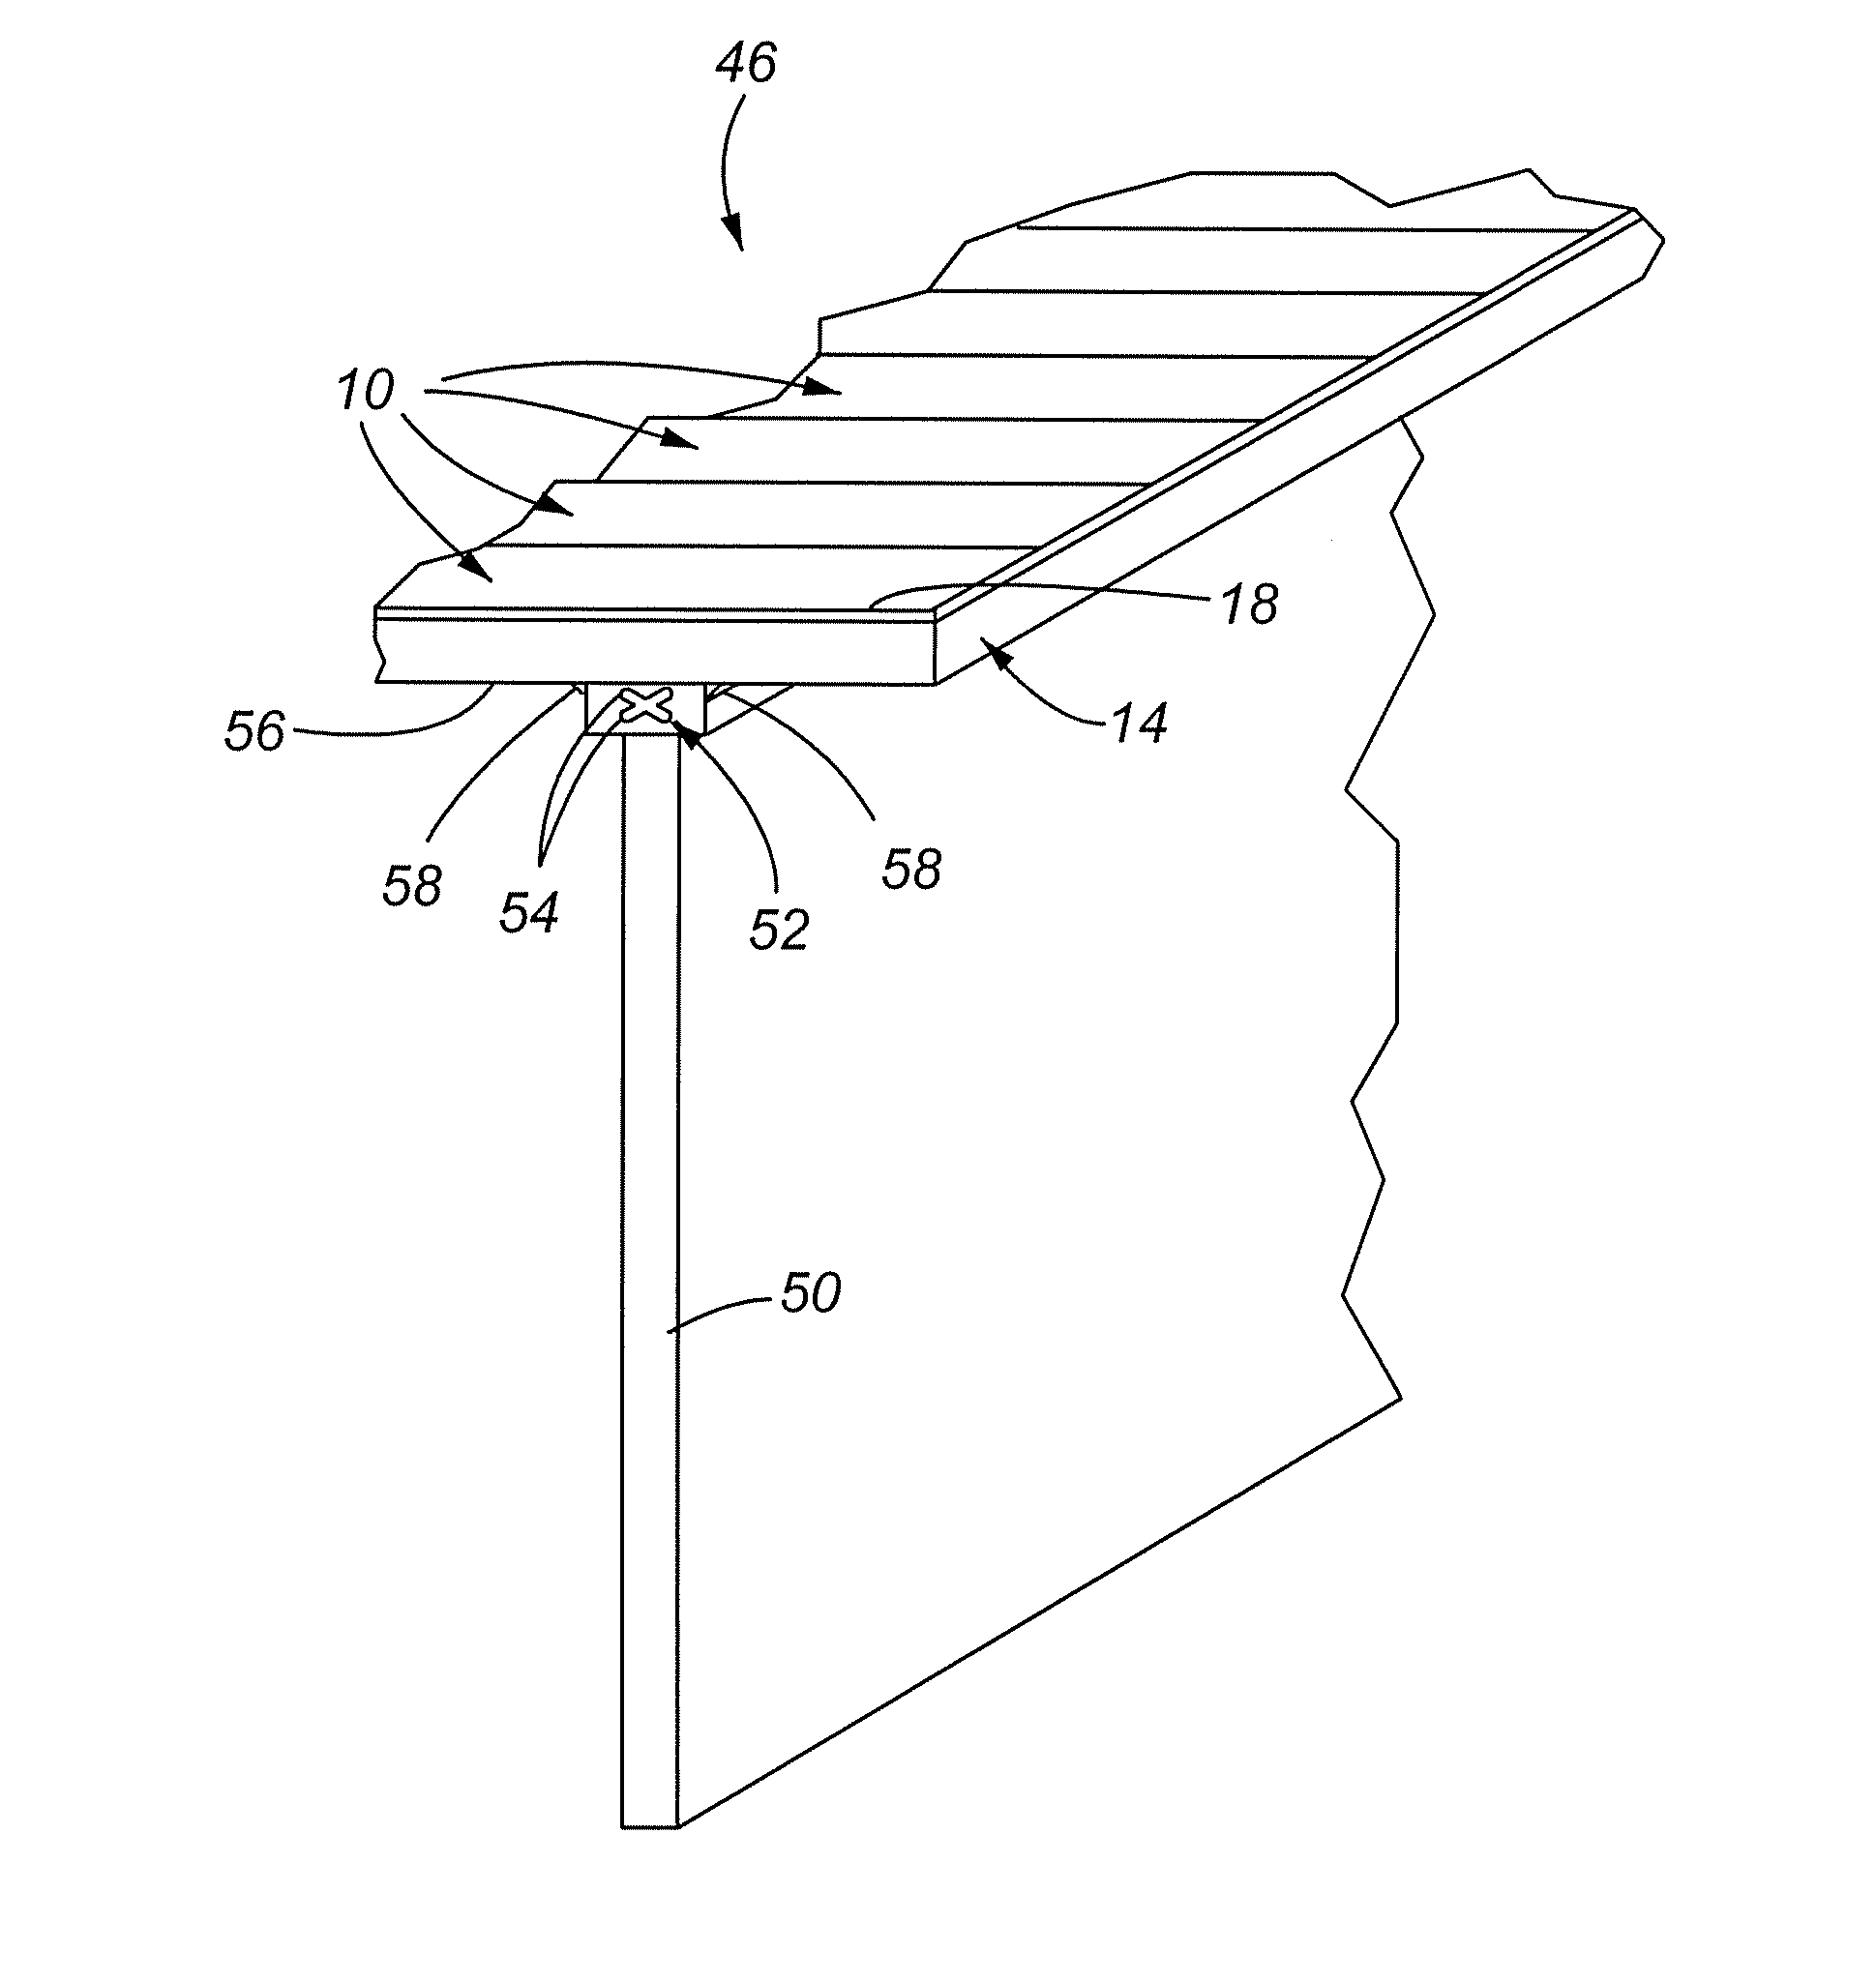 Composite decking material and methods associated with the same